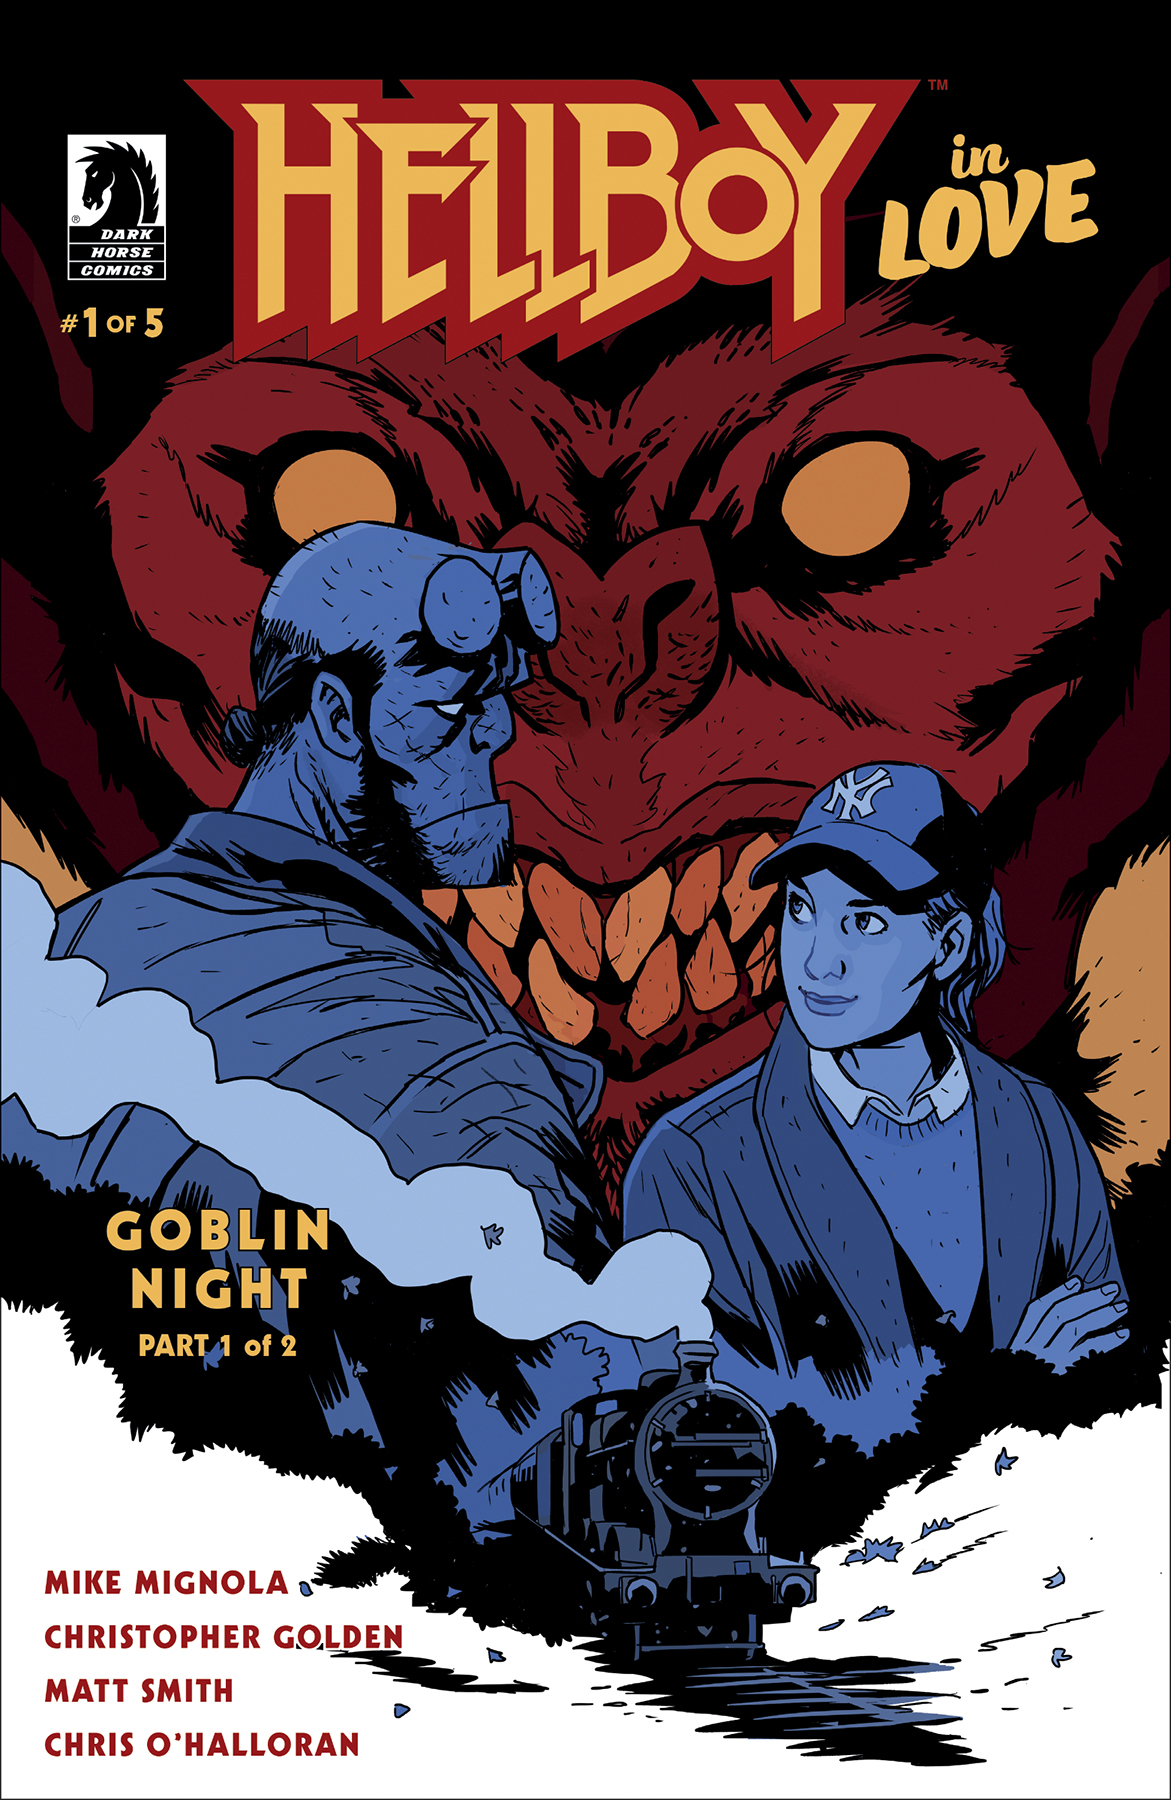 Hellboy & the B.P.R.D. Ongoing #63 Hellboy In Love #1 (Of 5)